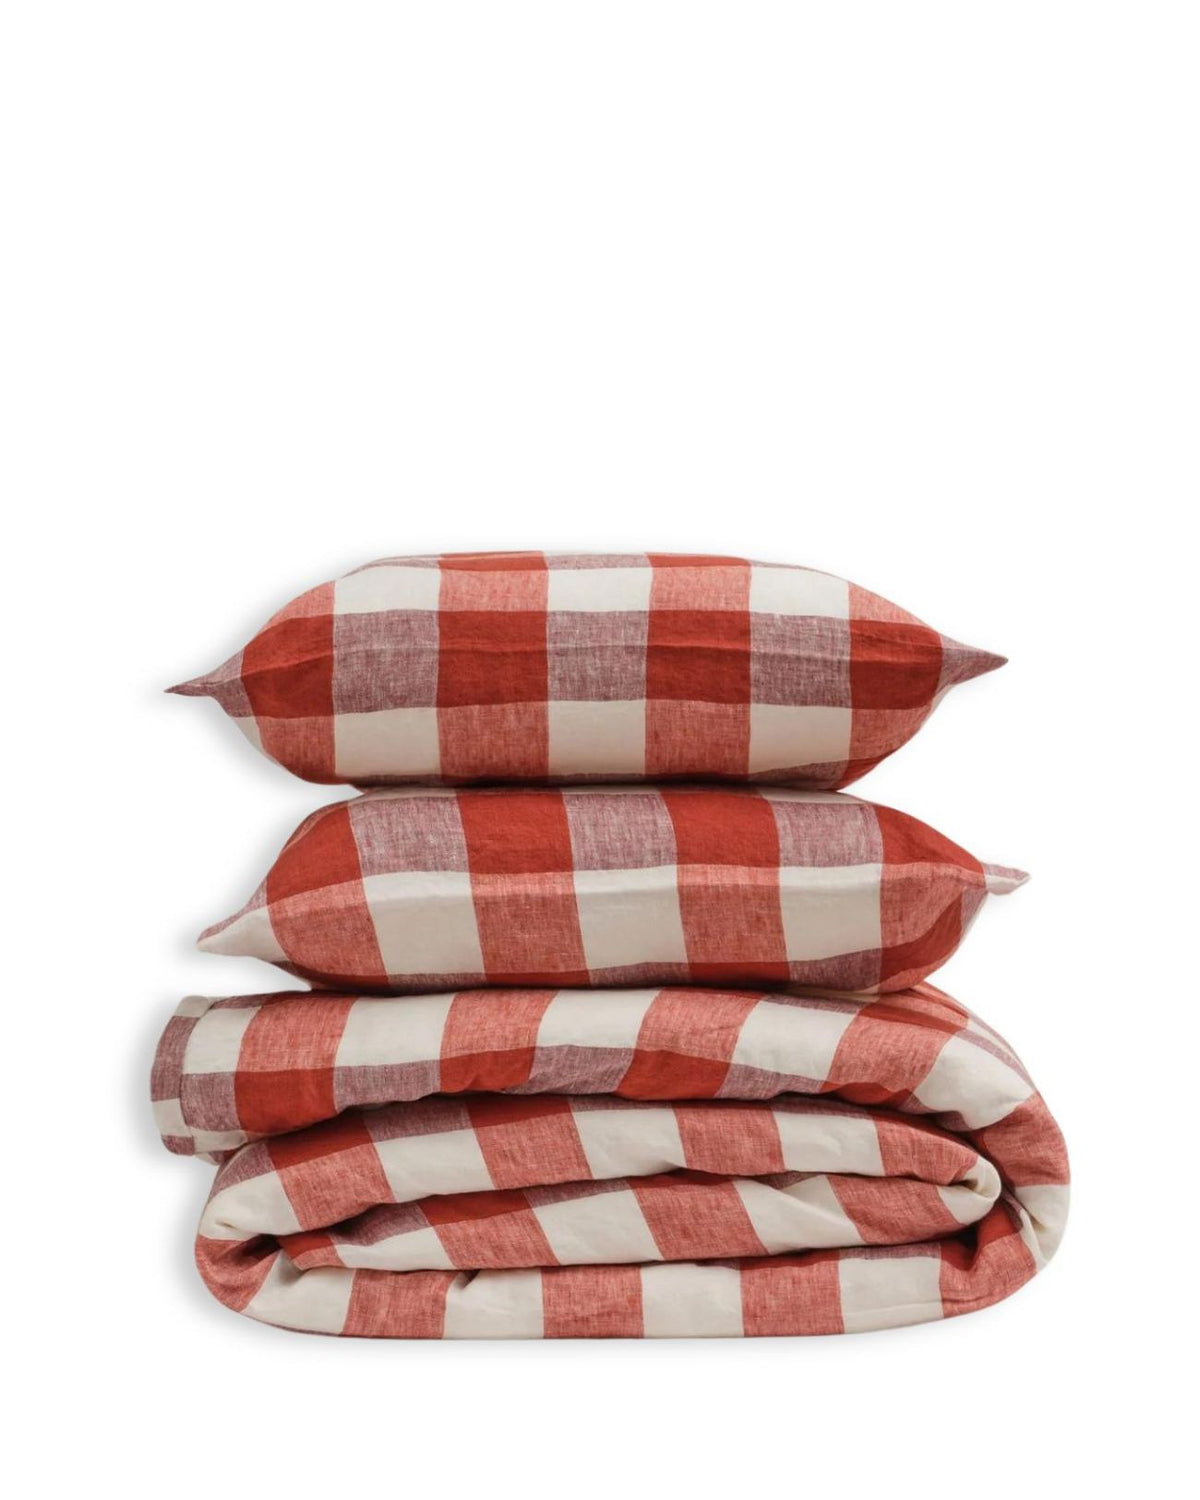 Make your kids' bedroom the comfiest place with our 100% French linen duvet cover set in Paprika. These duvet covers are finished with ties to create a natural look and to ensure making your kids bed is easy. Co-ordinates perfectly with the wide natural stripe sheet set.